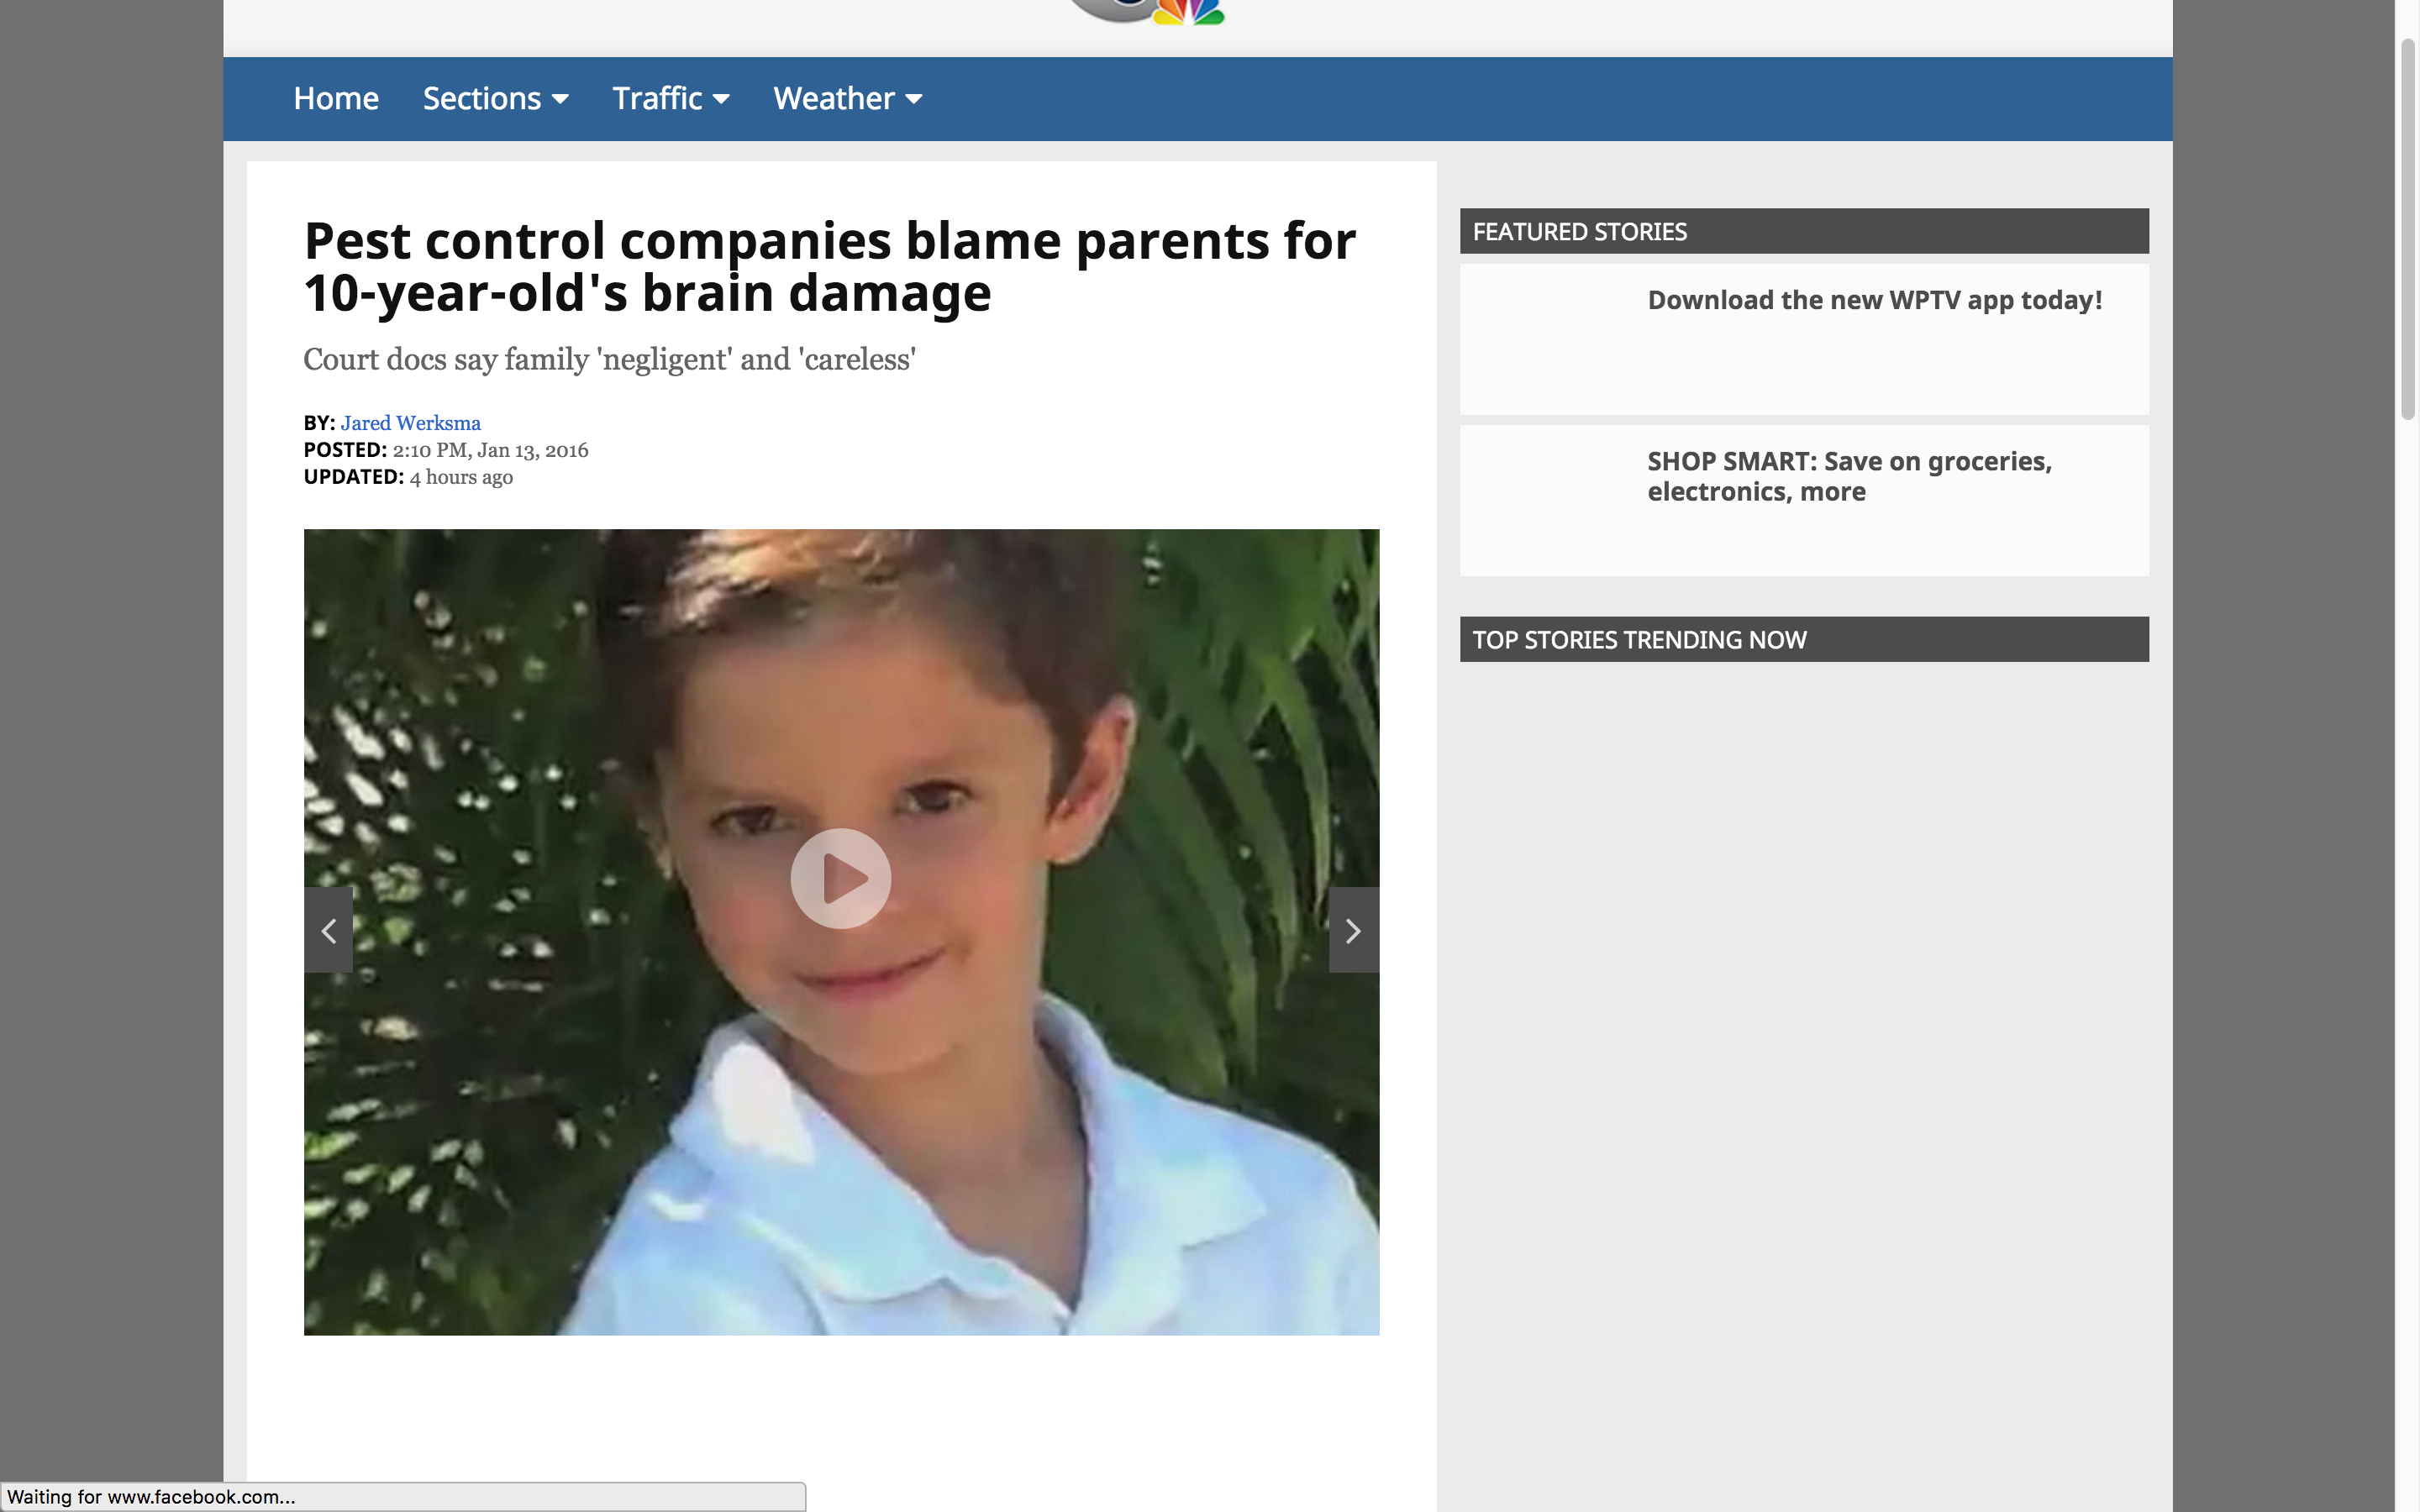 Terminix Blames Family for 10-year-old Son’s Brain Damage Caused by Fumigation